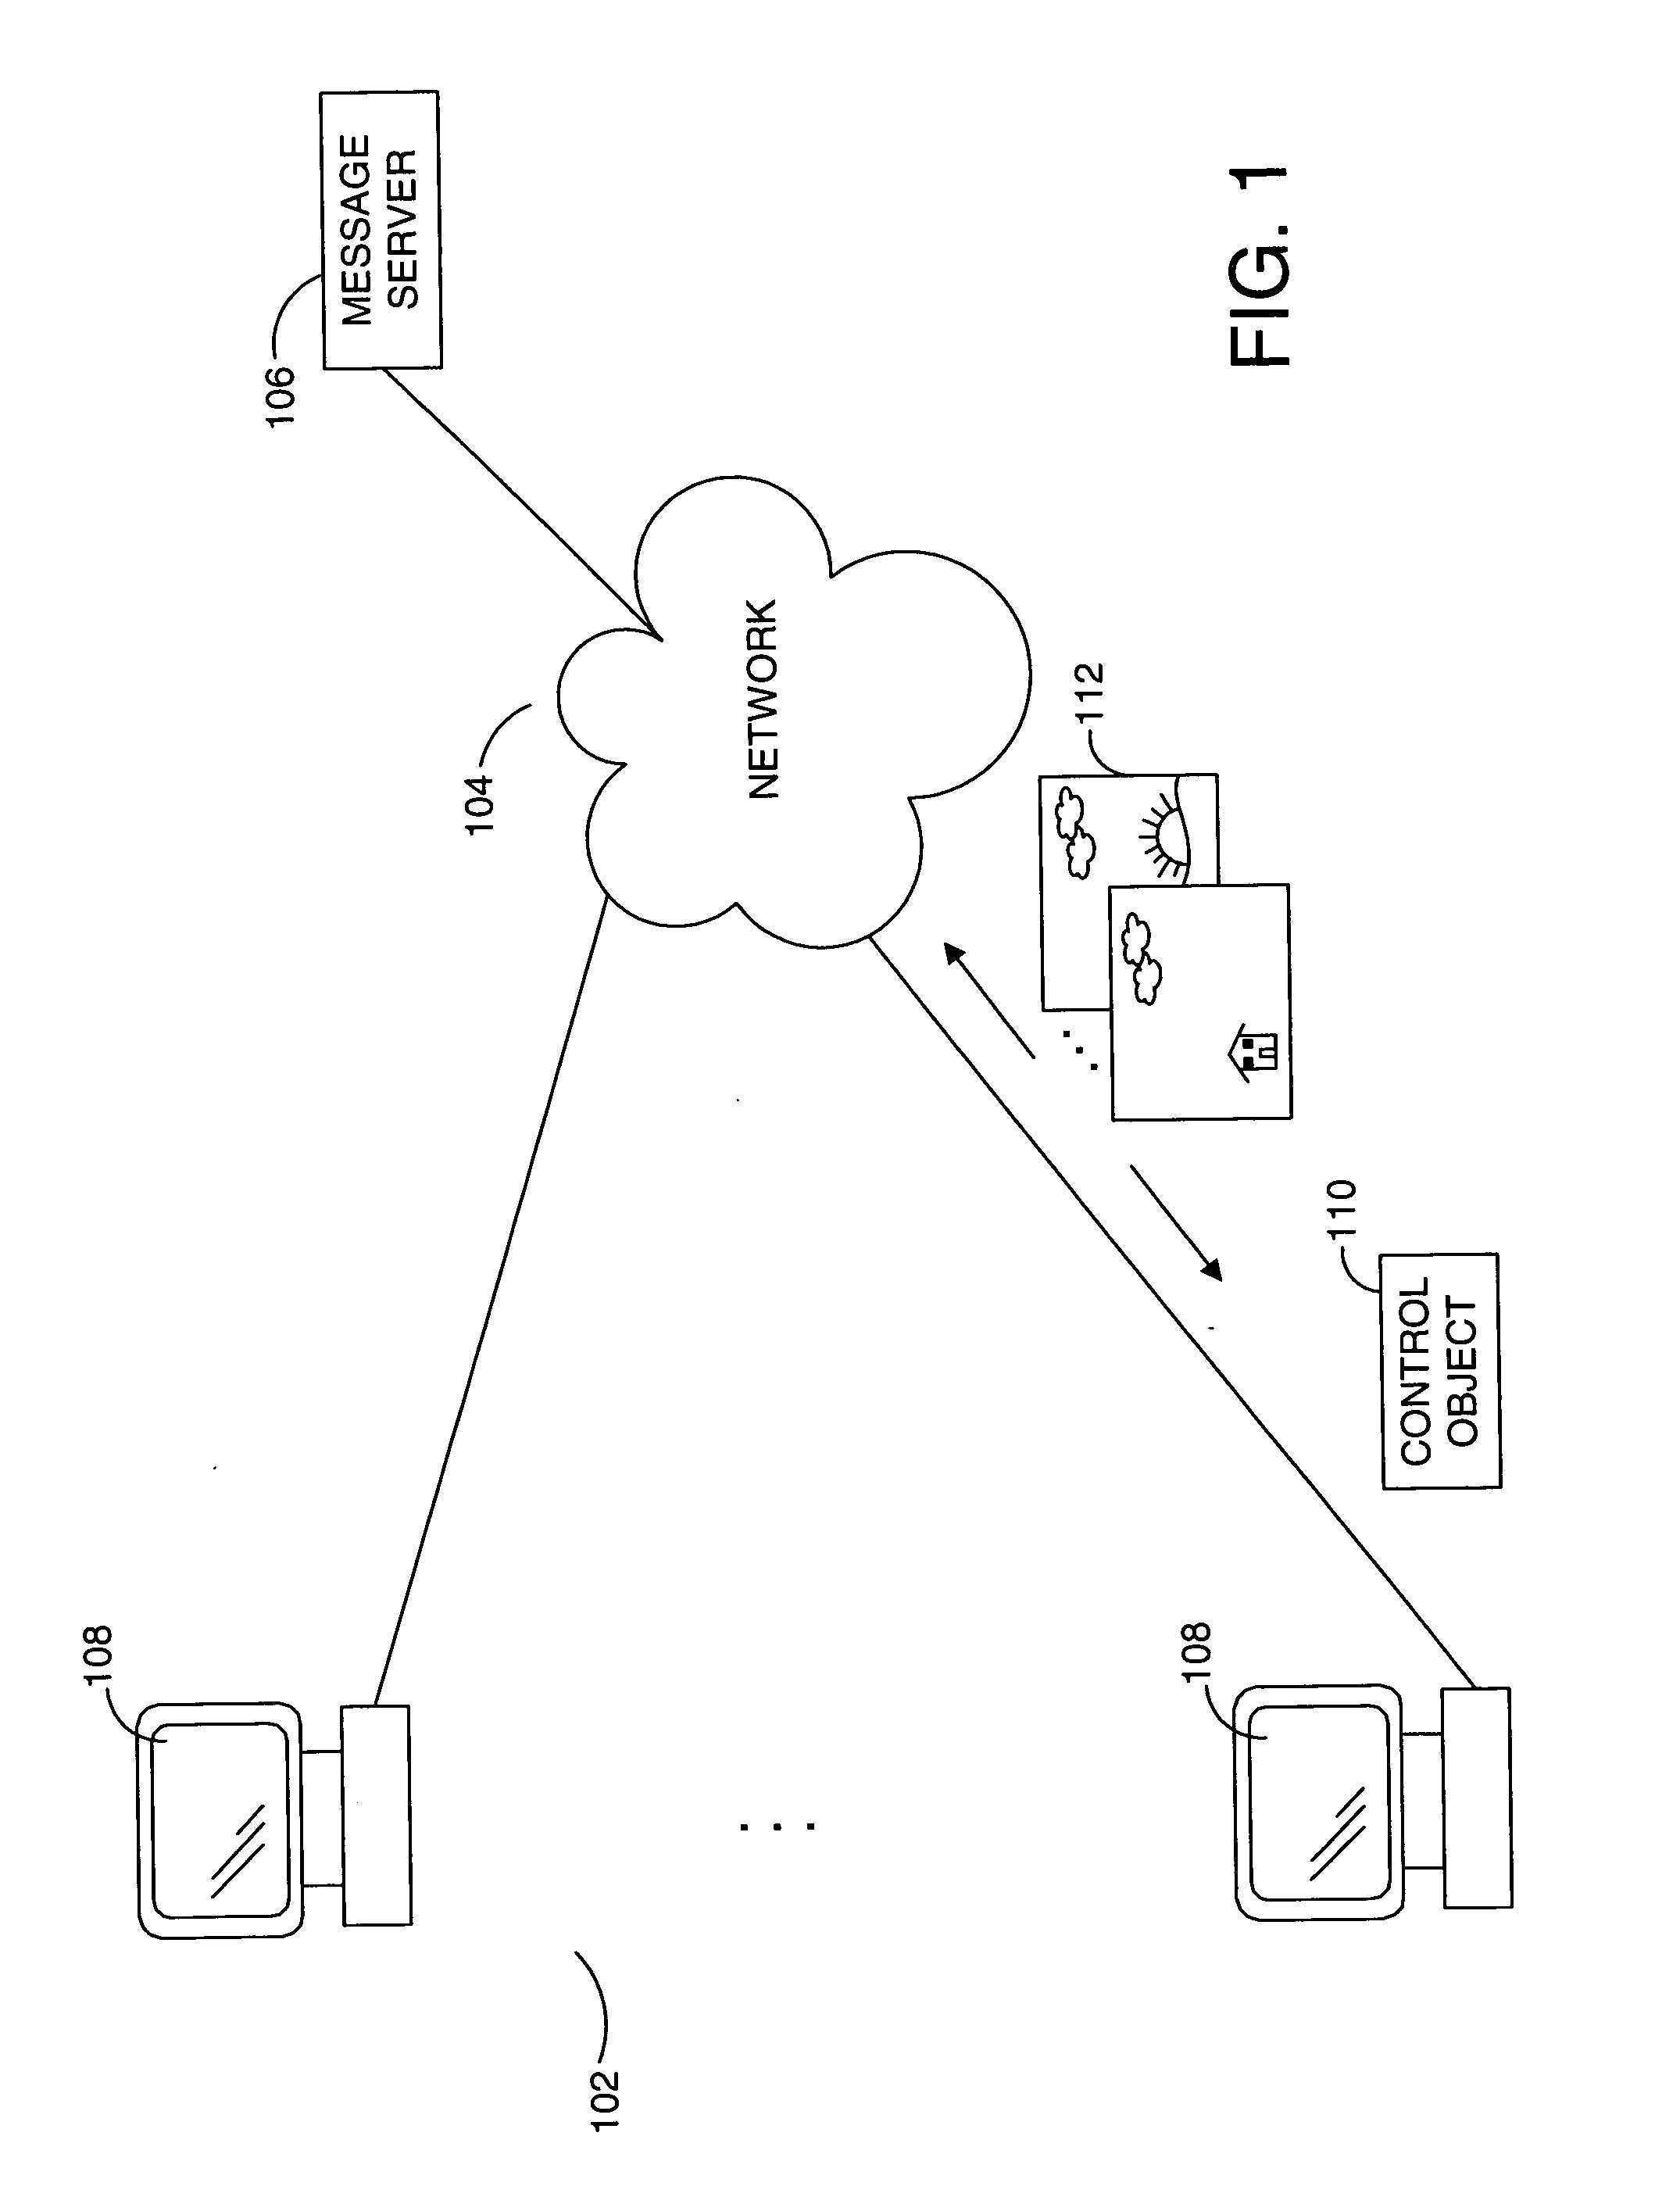 System and method for realtime messaging having image sharing feature